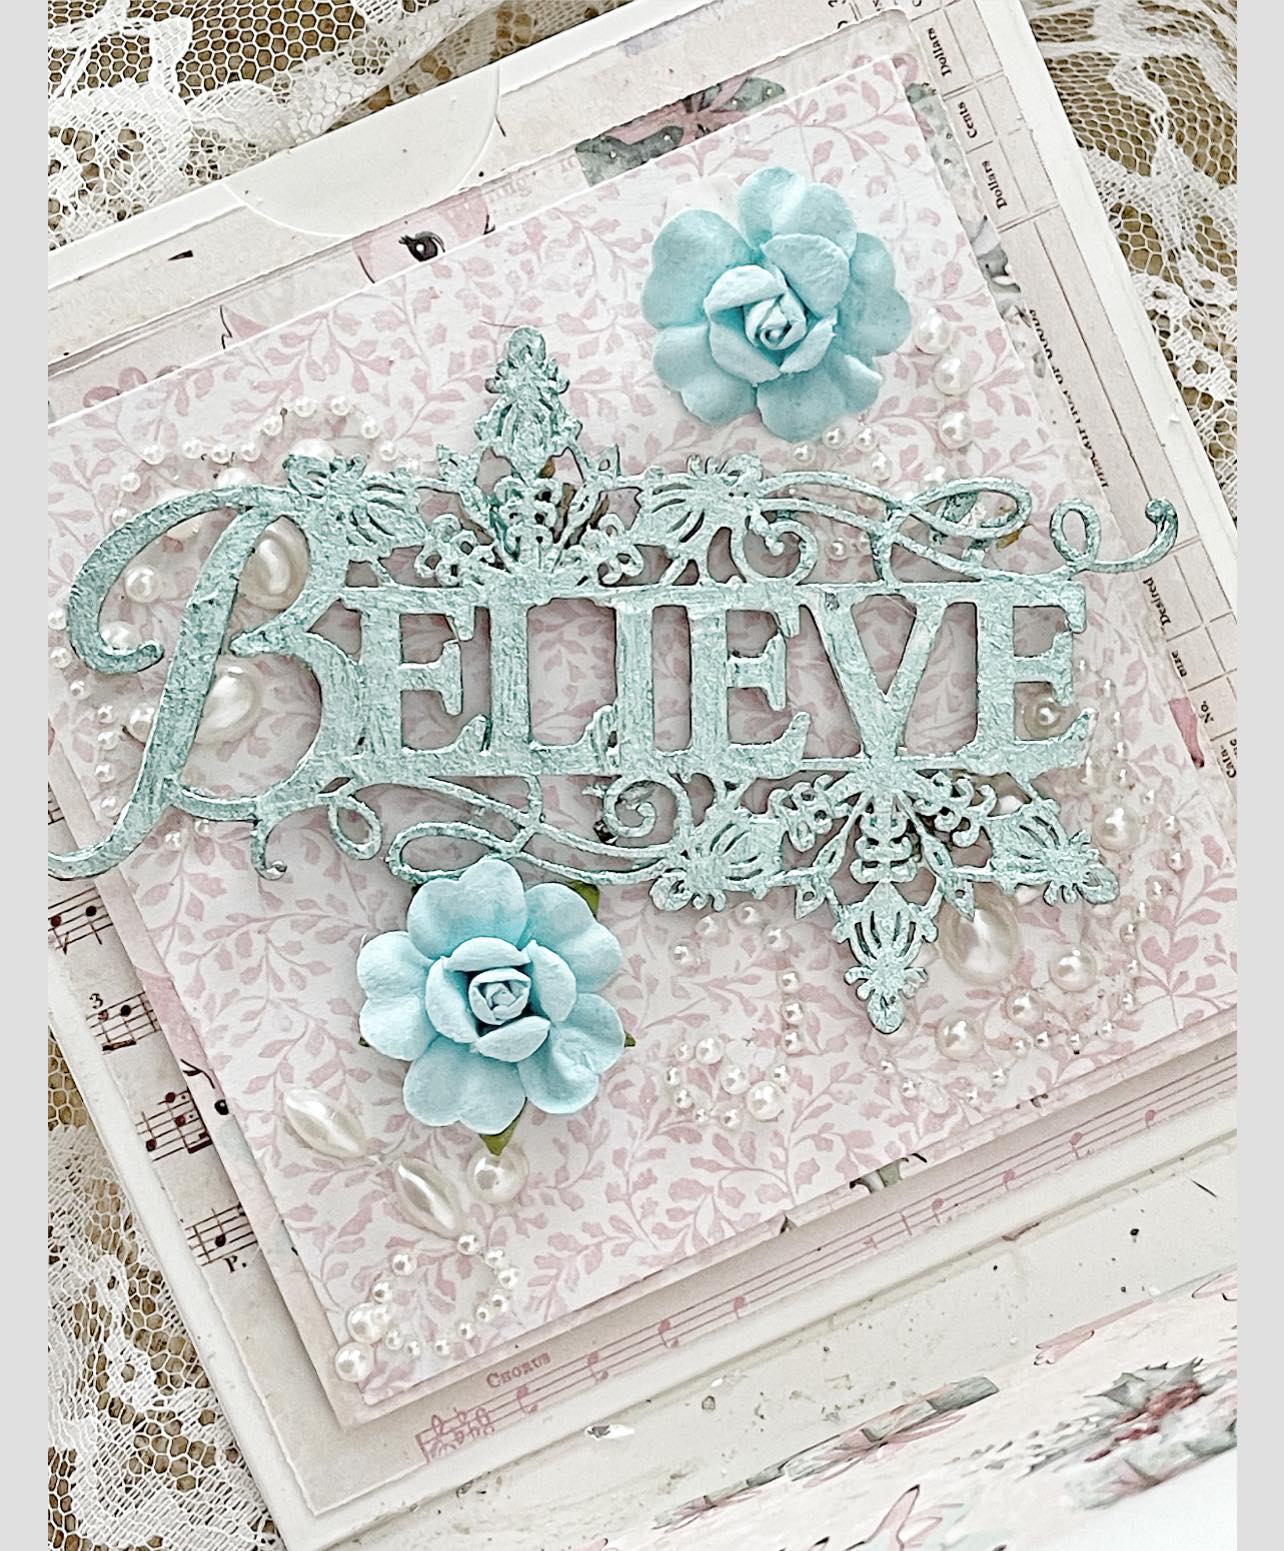 Scrapaholics Believe Chipboard for DIY Projects, Scrapbooking, Art Journals, Mixed Media, Collage